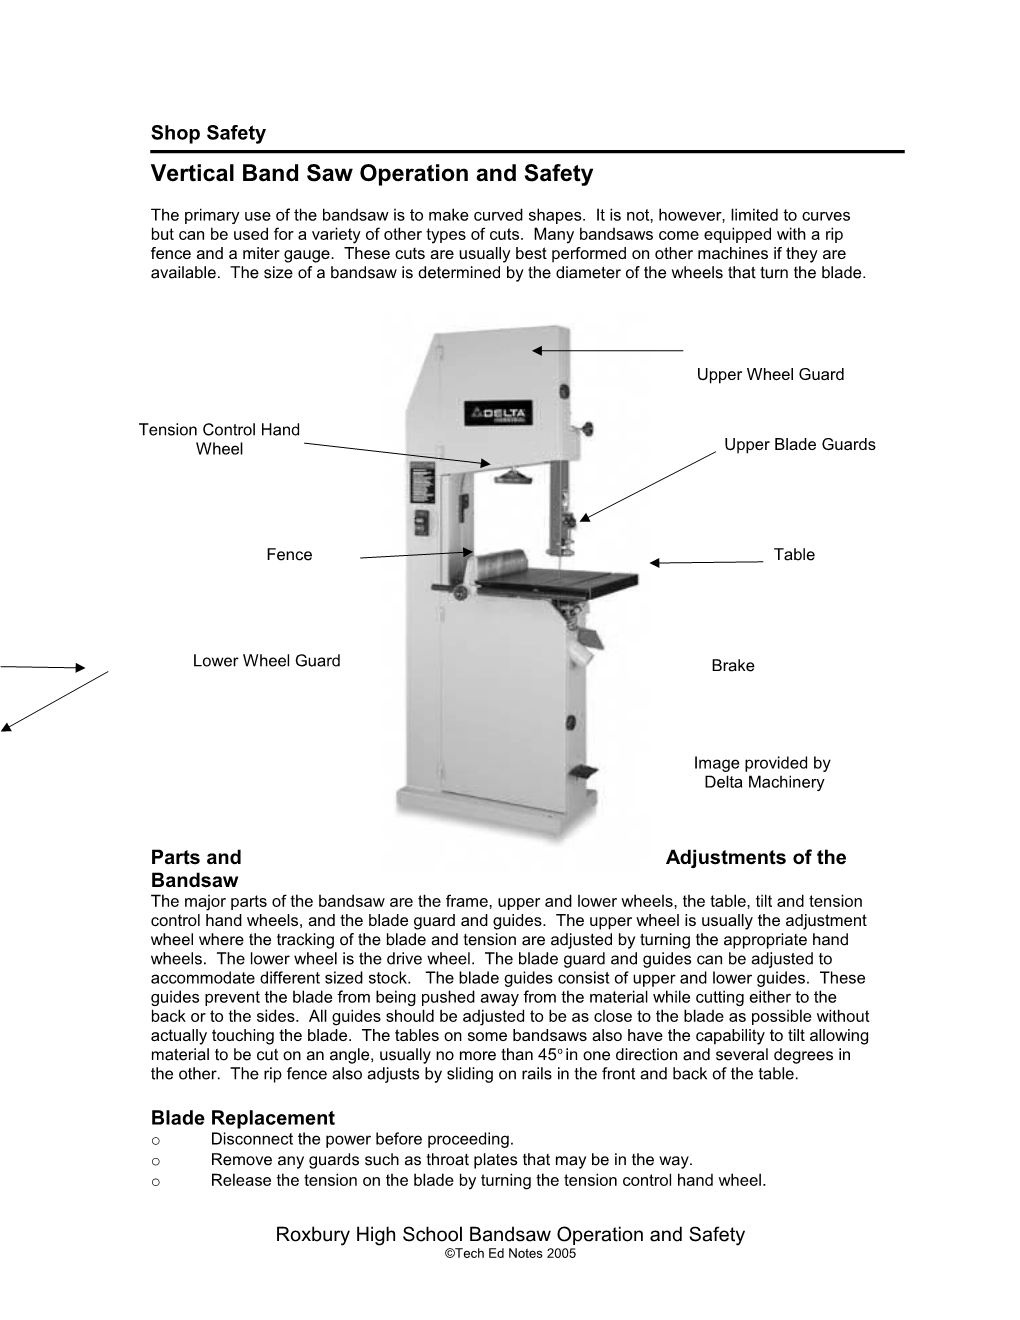 Vertical Band Saw Operation and Safety